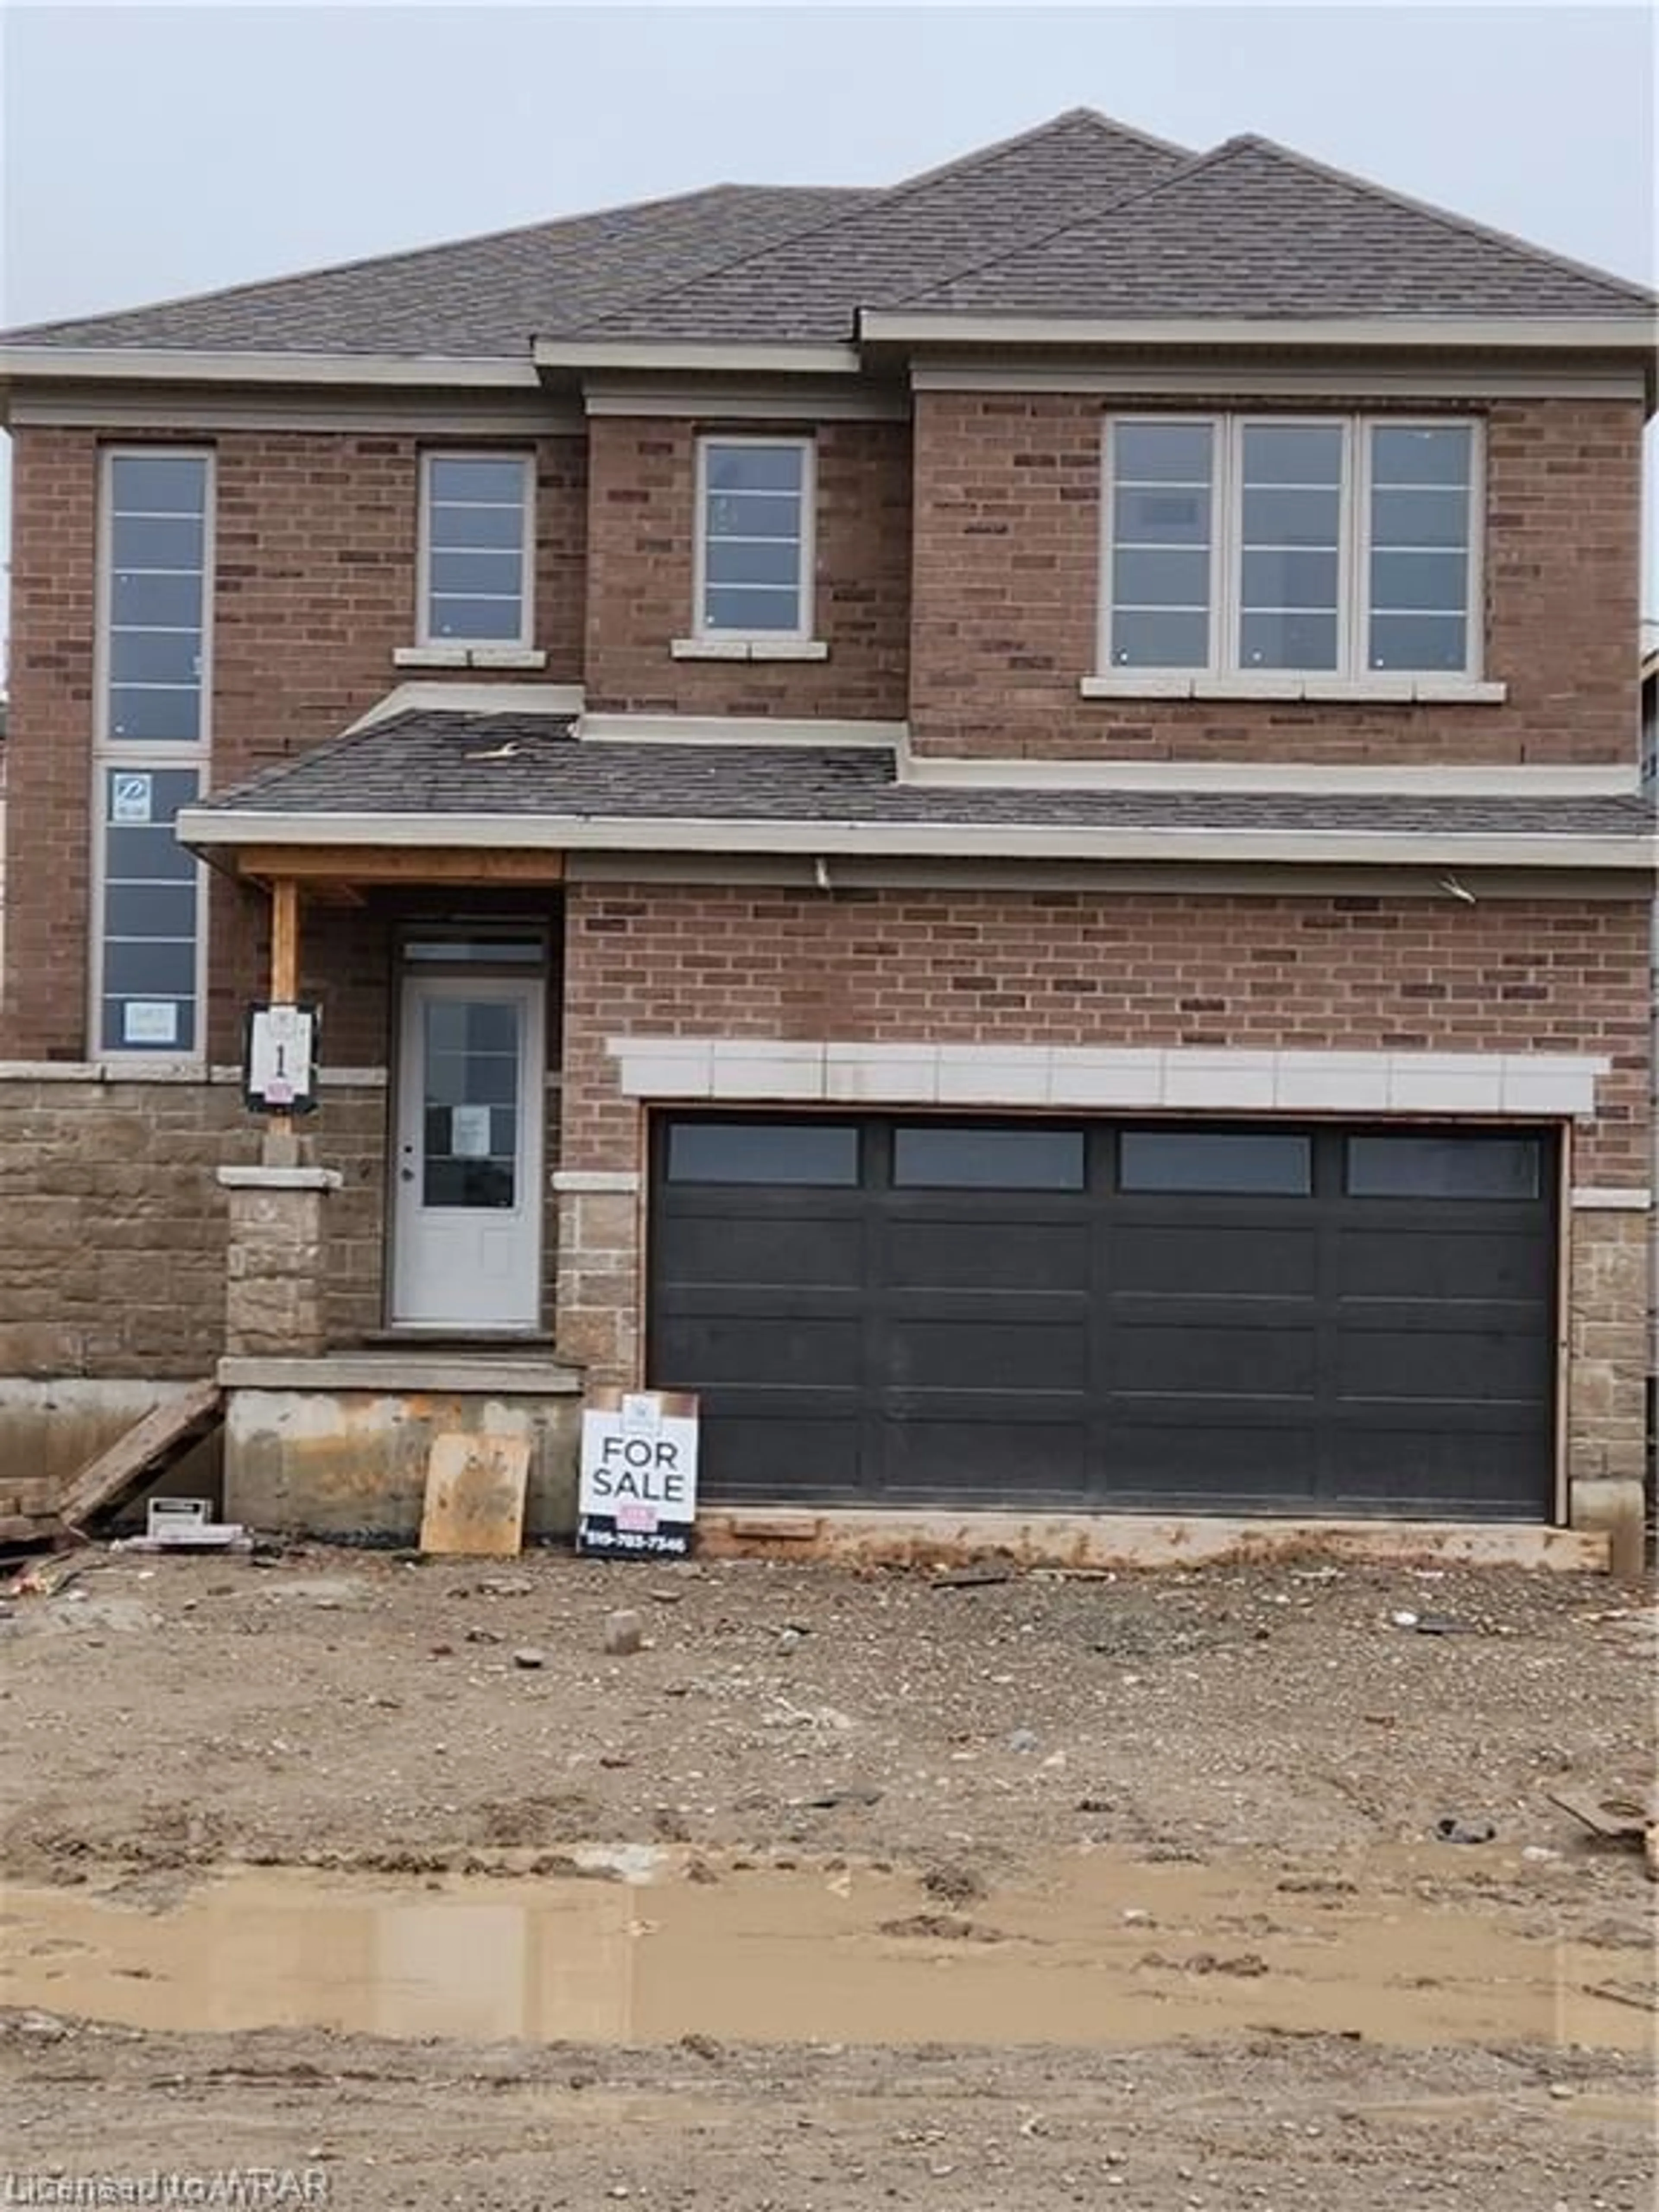 Home with brick exterior material for 444 Westhaven St, Waterloo Ontario N2T 0A4